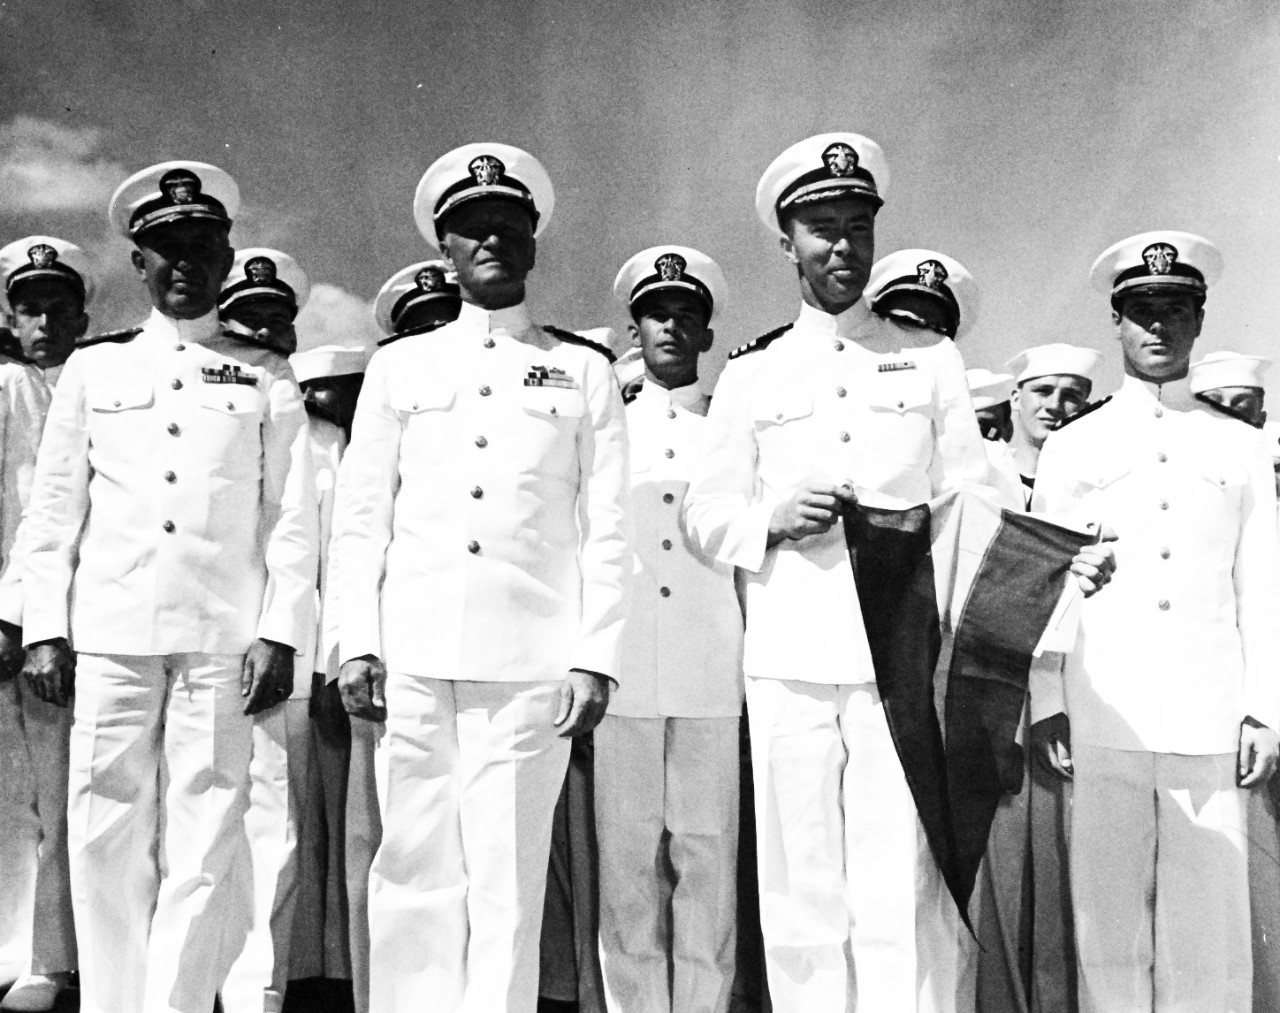 80-G-212209:  USS Nicholas (DD-449), 1944.   Admiral Chester W. Nimitz, USN, CincPac and Pacific Ocean Areas, (center) presented the Presidential Unit Citation to USS Nicholas (DD-449) for outstanding performance in action against enemy Japanese forces off Kolombangara Island, New Georgia group on July 5-6, 1943.  Commander R.T.S. Keith, USN, (right), Co of Nicholas holds the banner.  Rear Admiral J.L. Kauffman, USN, Commander Destroyers, Pacific Fleet, stands at the left.  Ceremony took place at Pearl Harbor, January 29, 1944.    U.S. Navy Photograph, now in the collections of the National Archives.  (2017/05/02).  